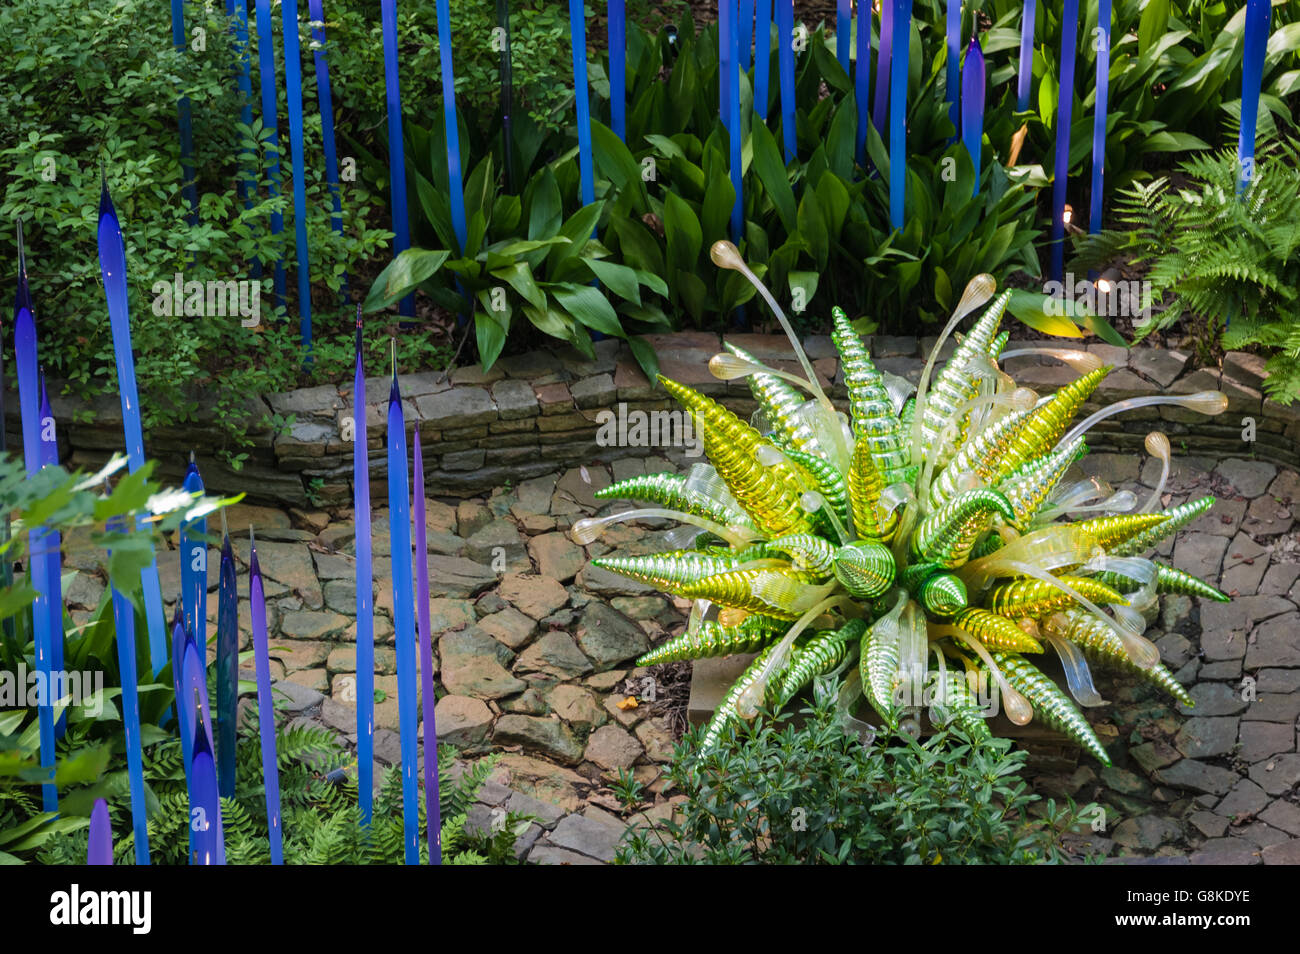 'Green Hornet and Water Drops' with 'Neodymium Reeds' glass sculptures by Dale Chihuly at Atlanta Botanical Garden in Piedmont Park. (USA) Stock Photo